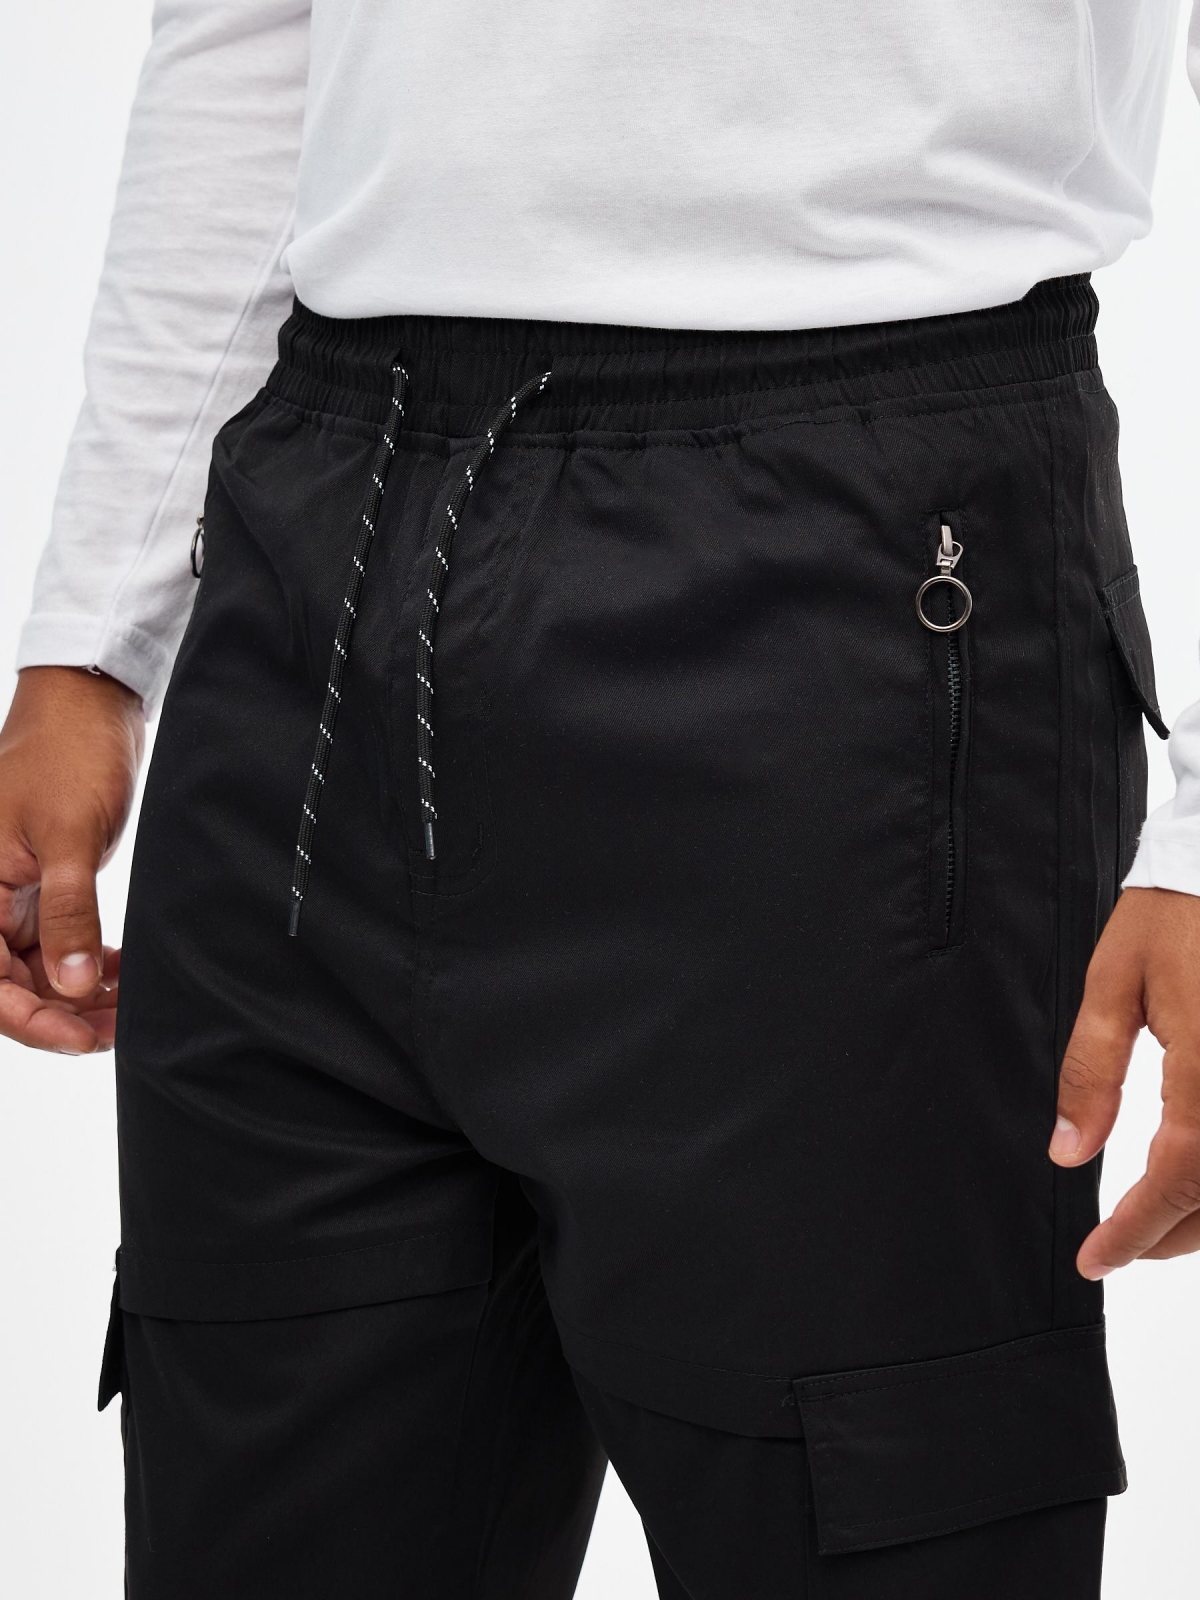 Jogger pants with adjustable ankles black detail view